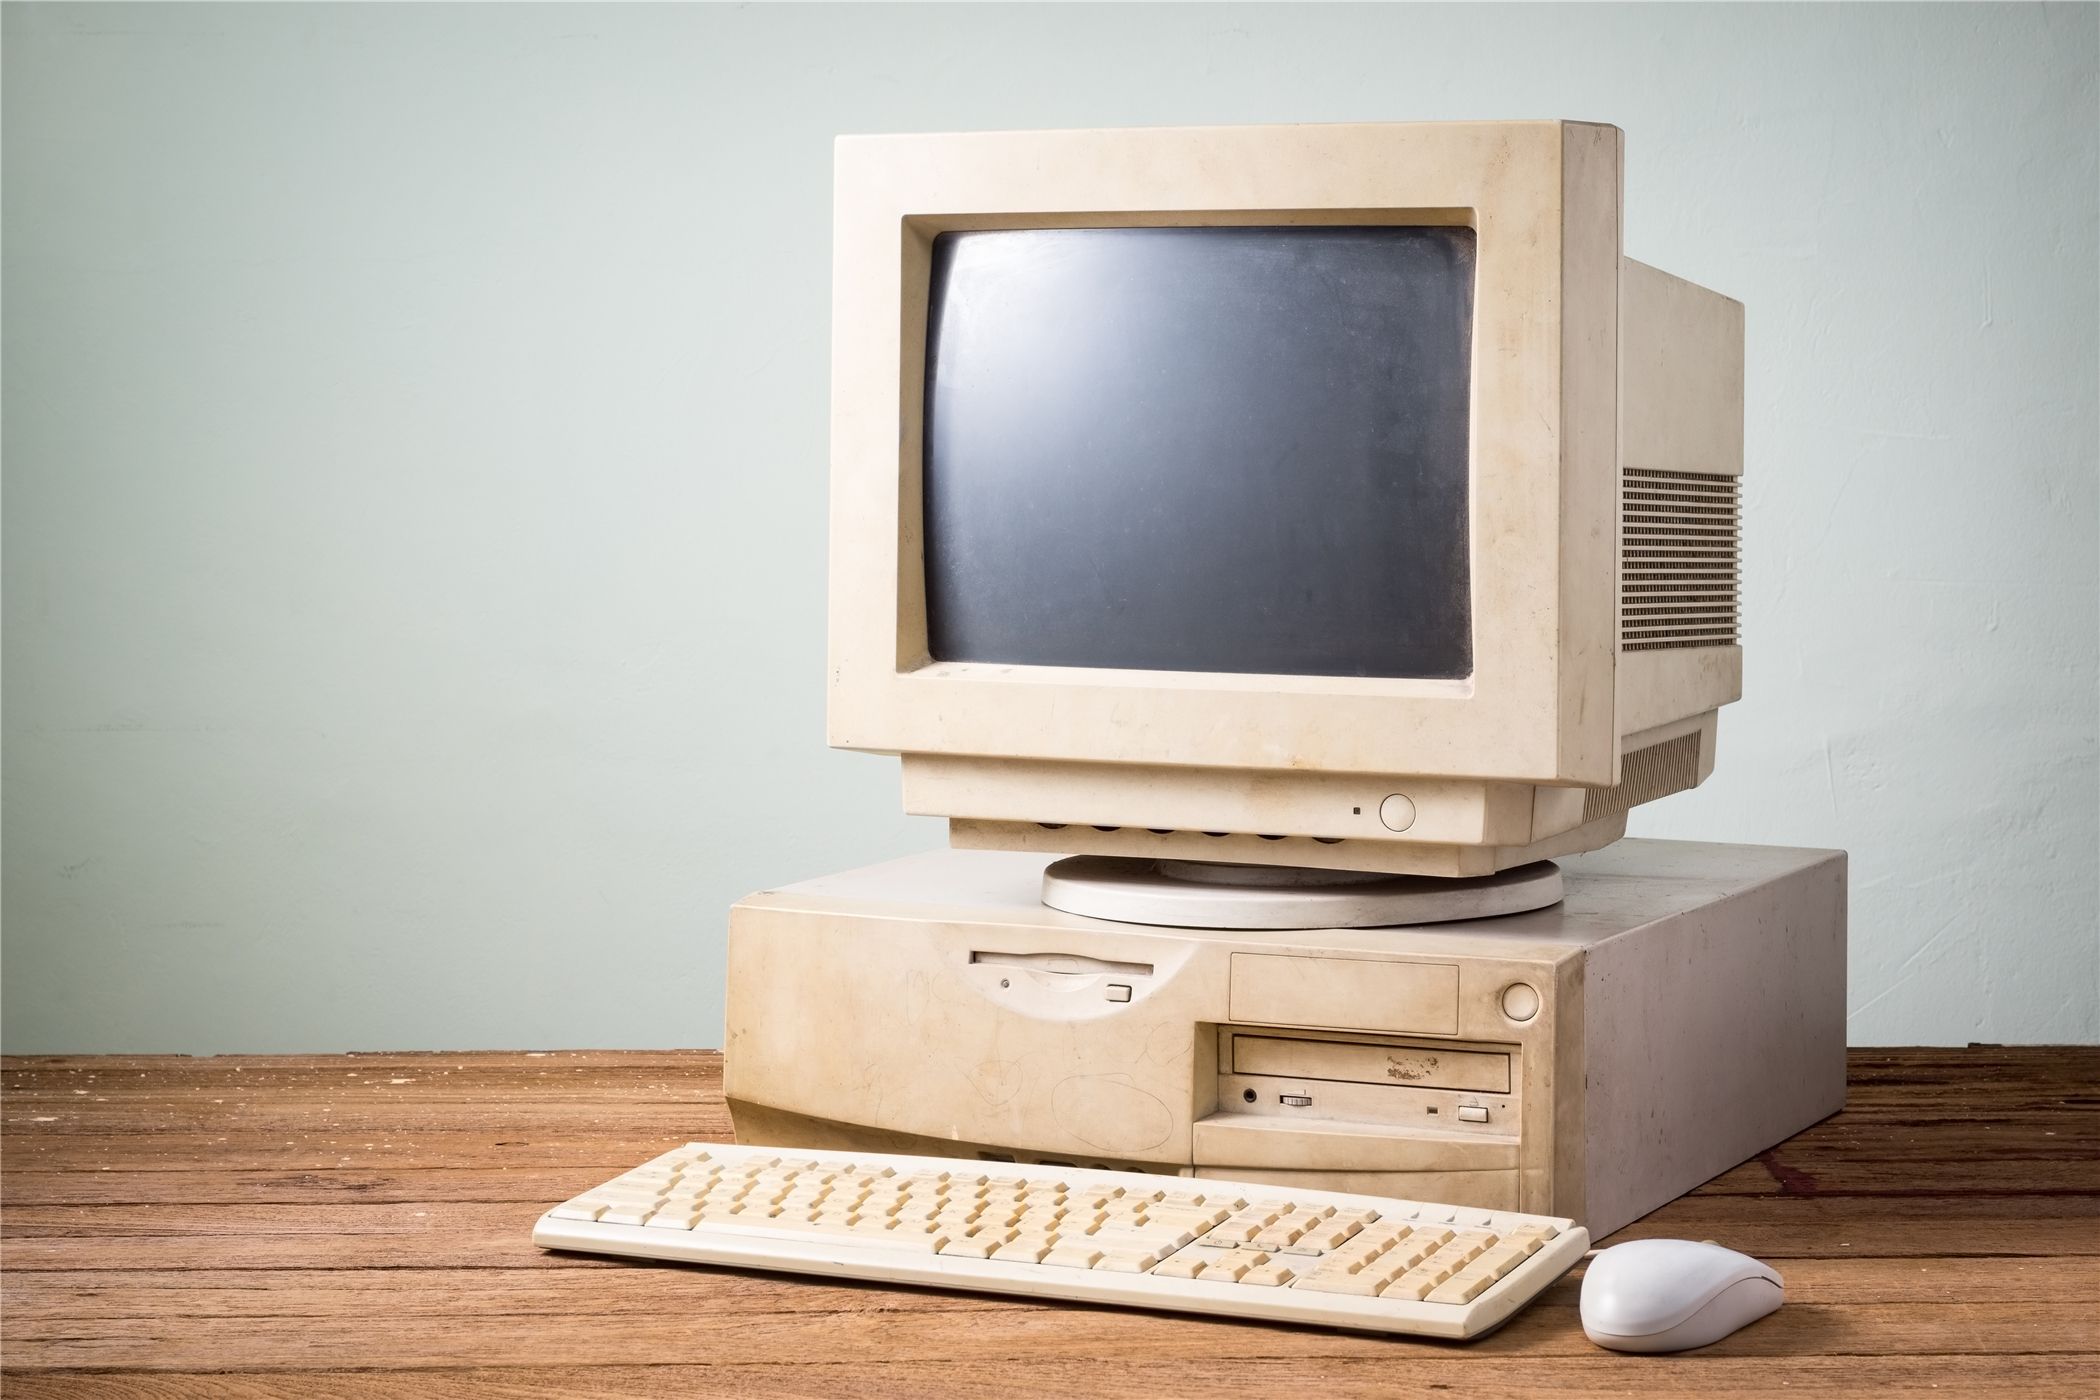 An old beige PC with a CRT monitor. 